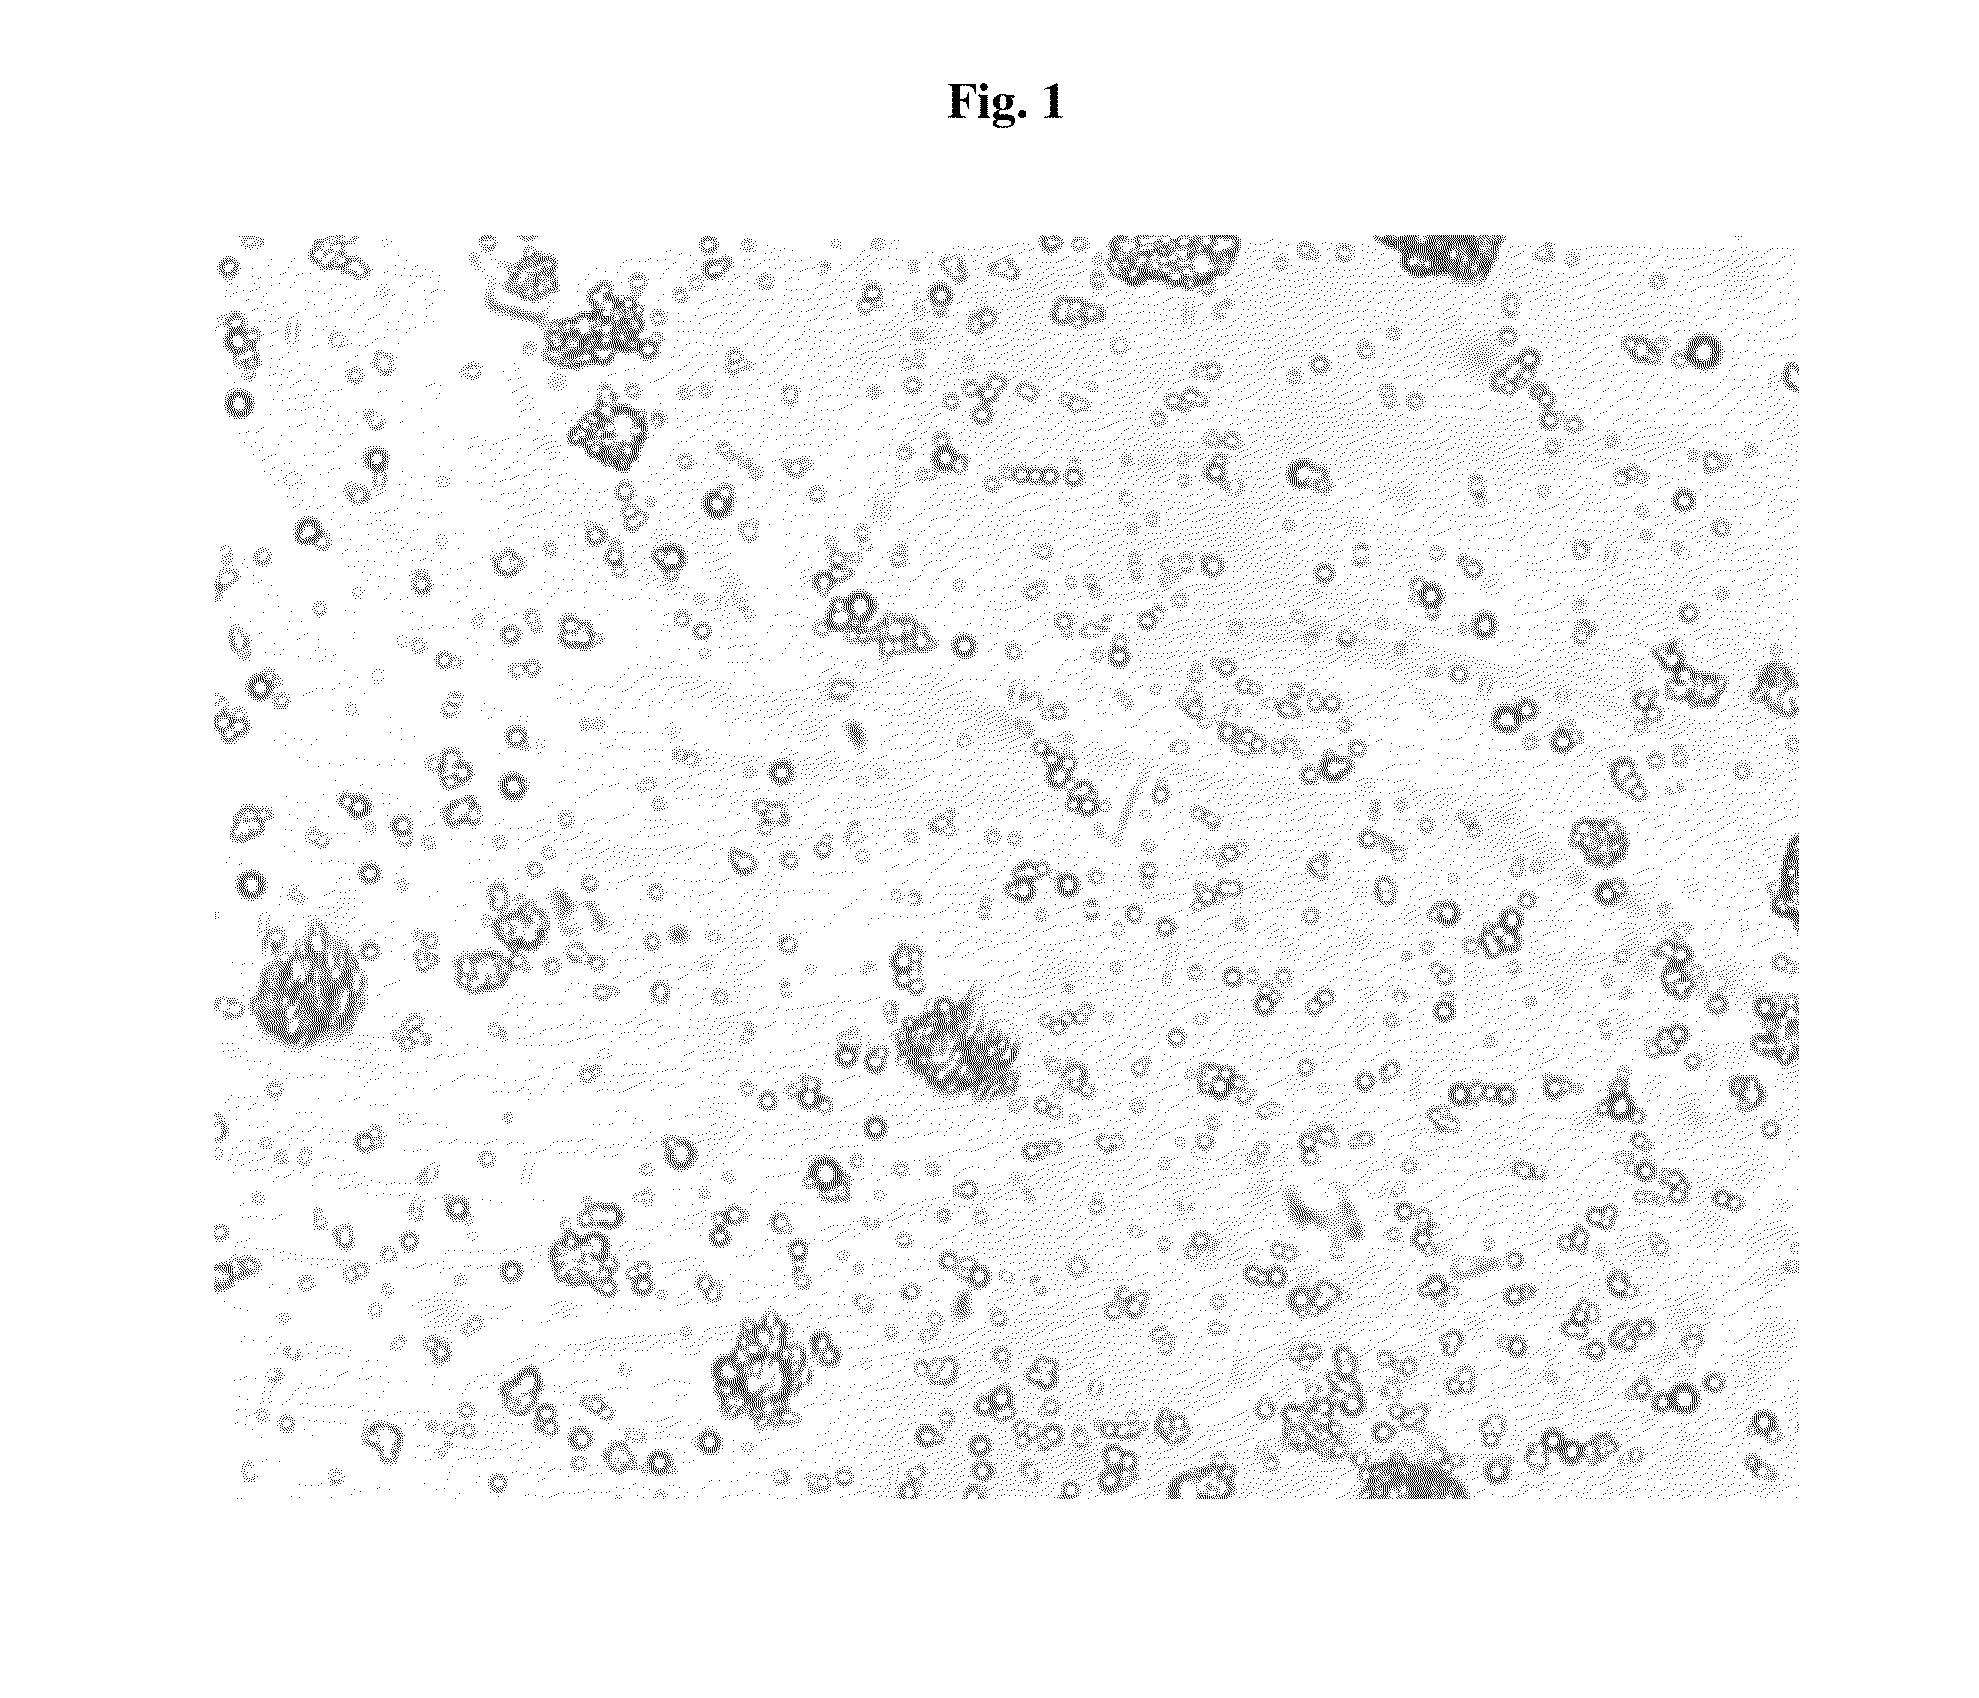 Pharmaceutical Compositions Comprising Phosphate-Binding Polymer